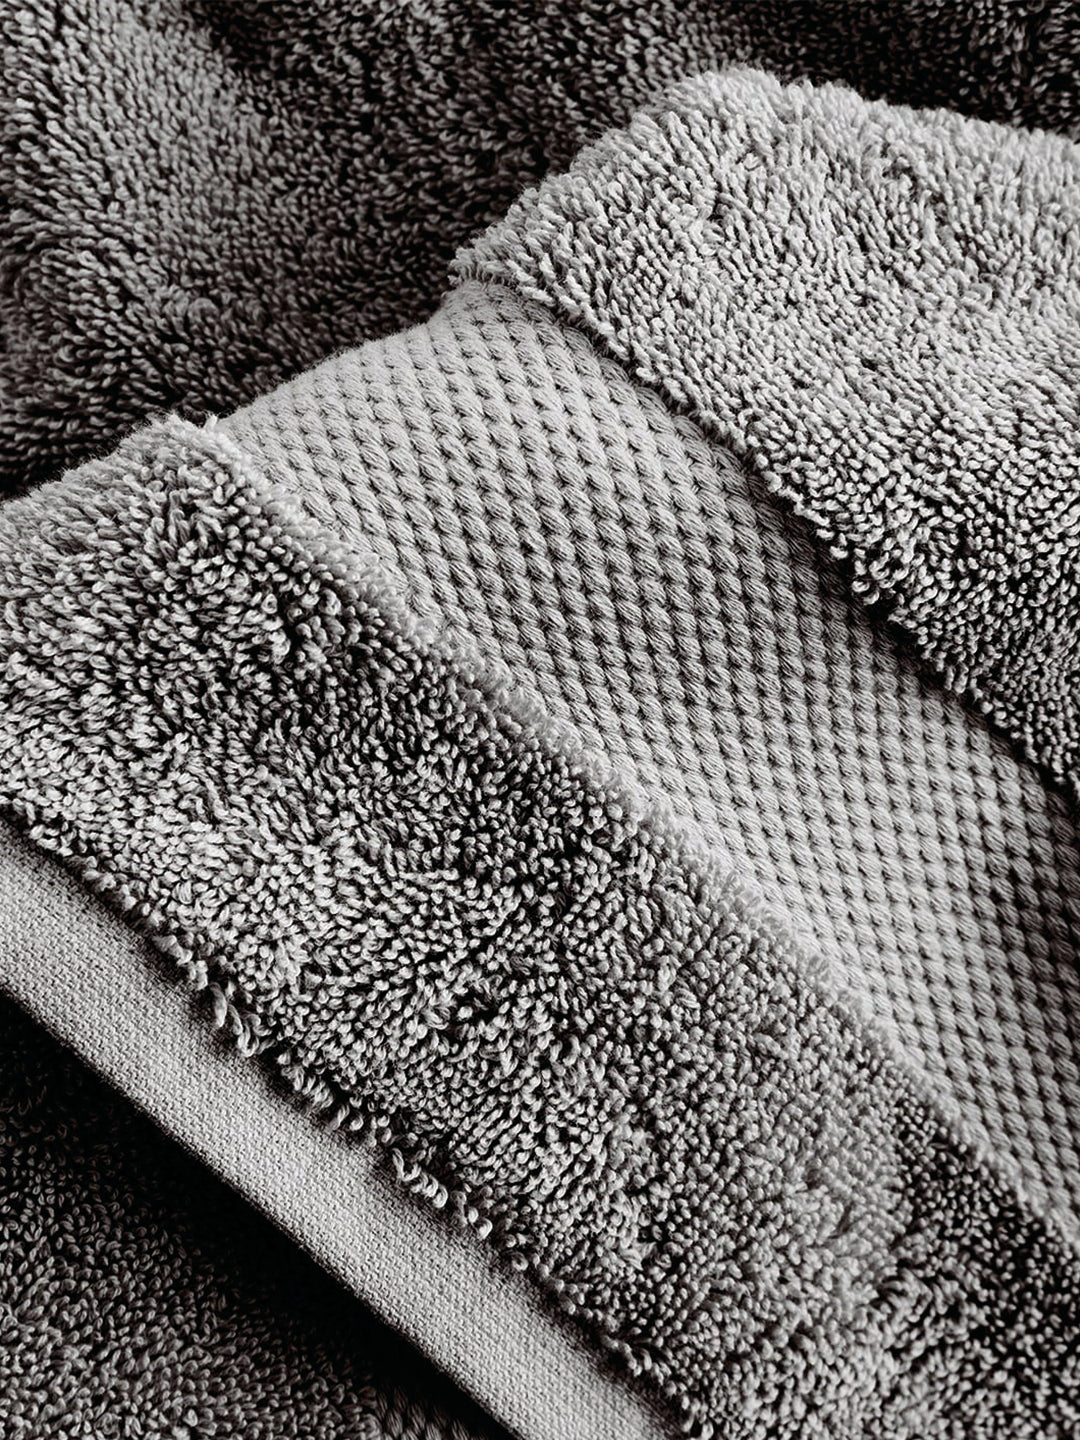 Face Towels (Set Of 3) in Organic Cotton - Gray